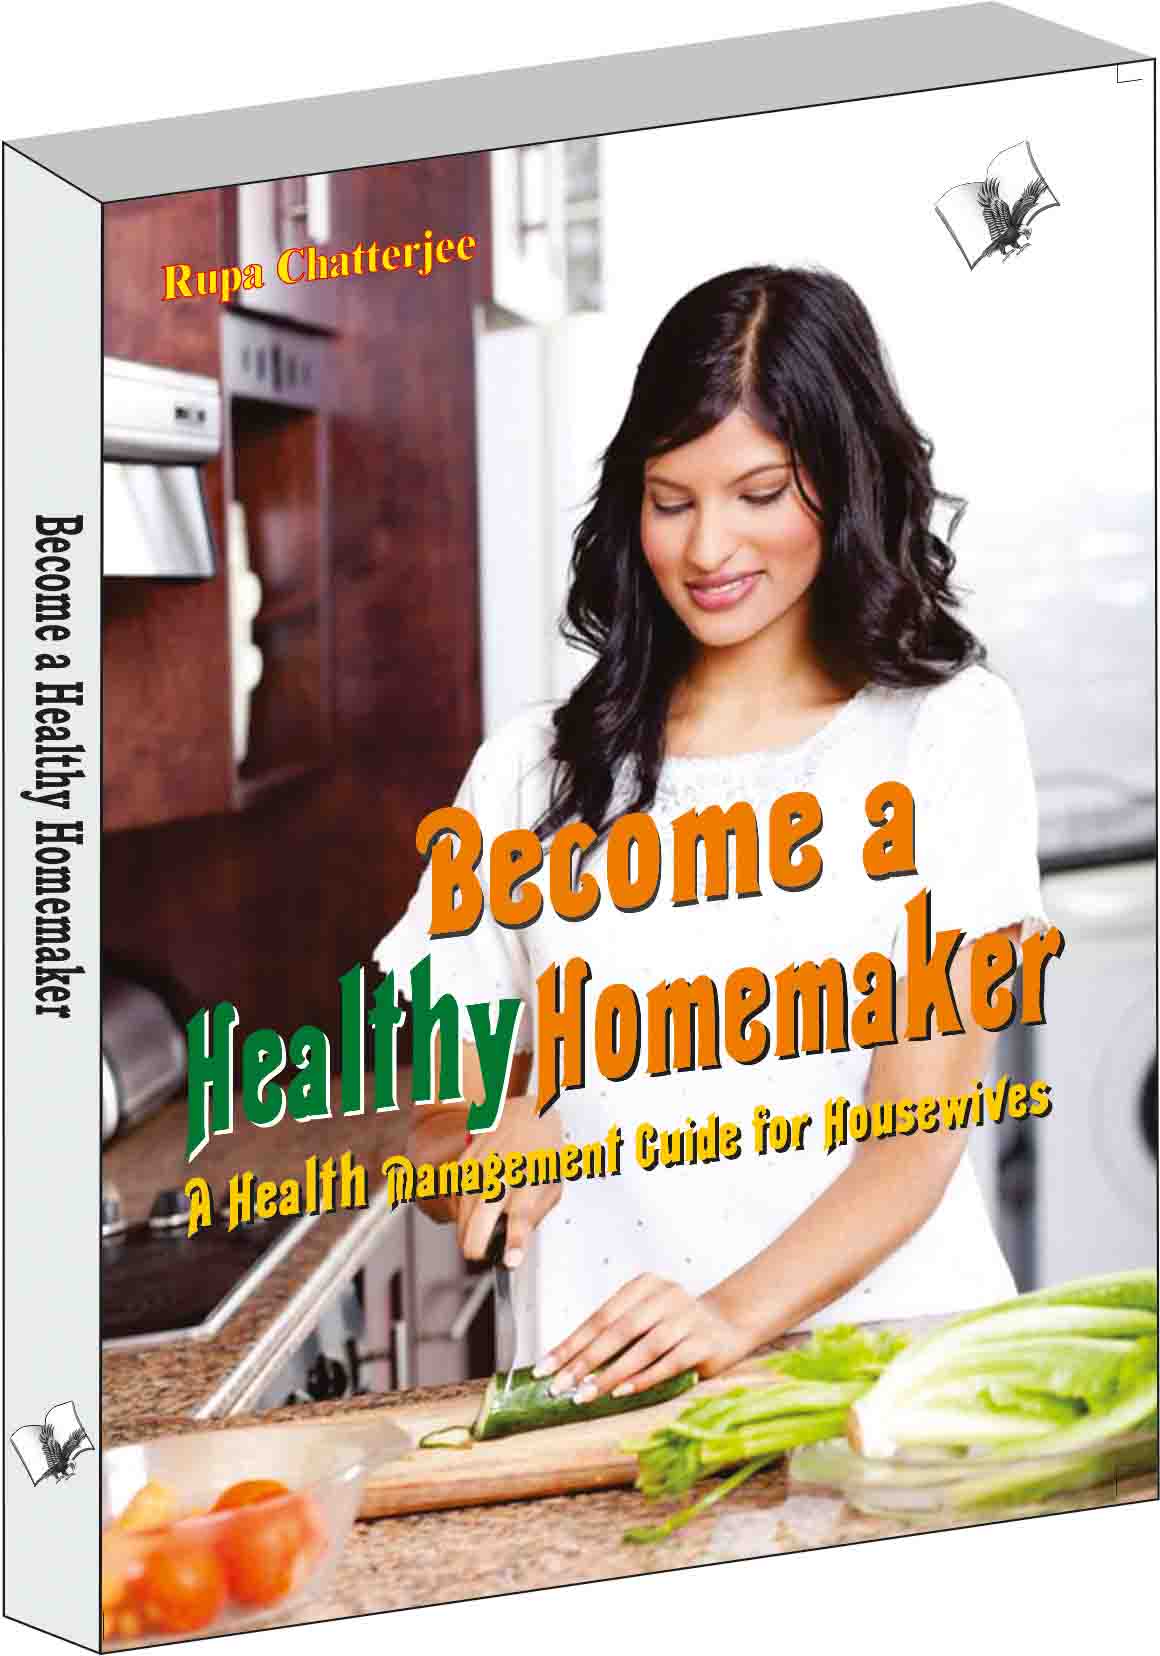 Become a Healthy Homemaker-Time saving tips to remain fit and healthy